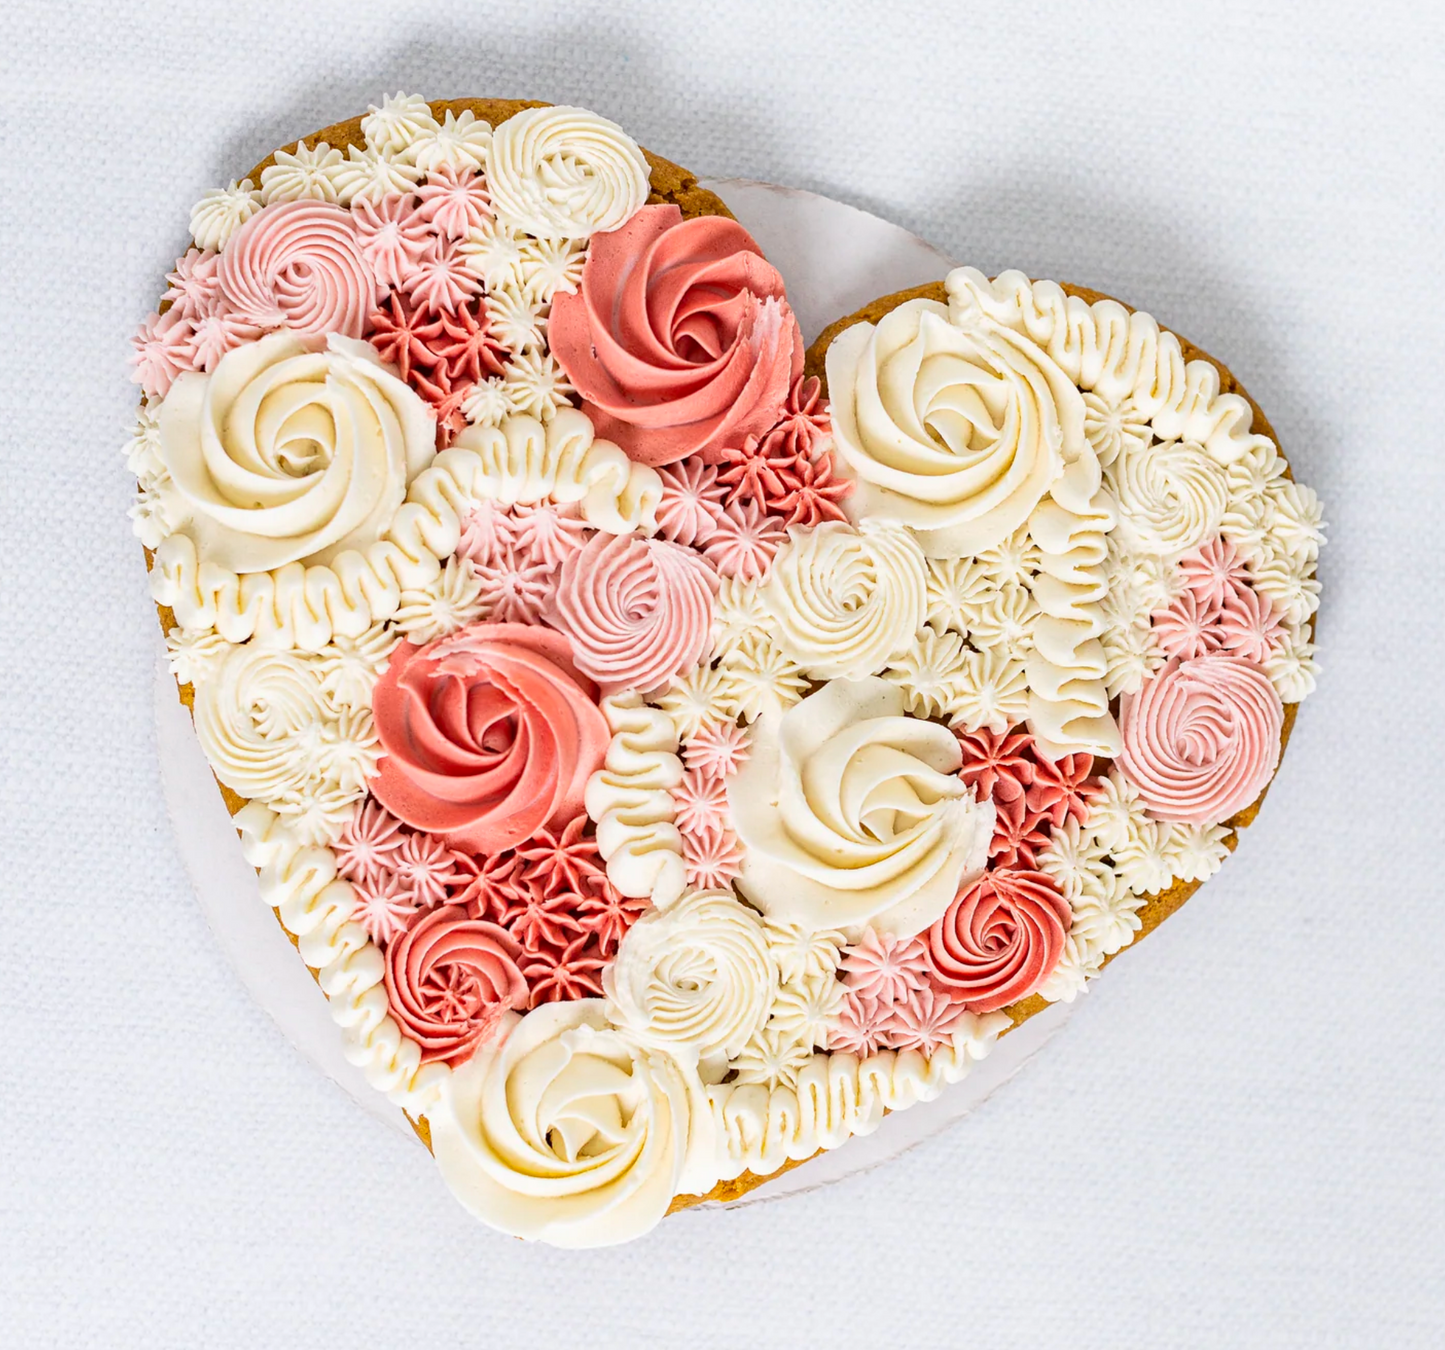 Valentine's Heart Cookie Cake (In Store Pickup)